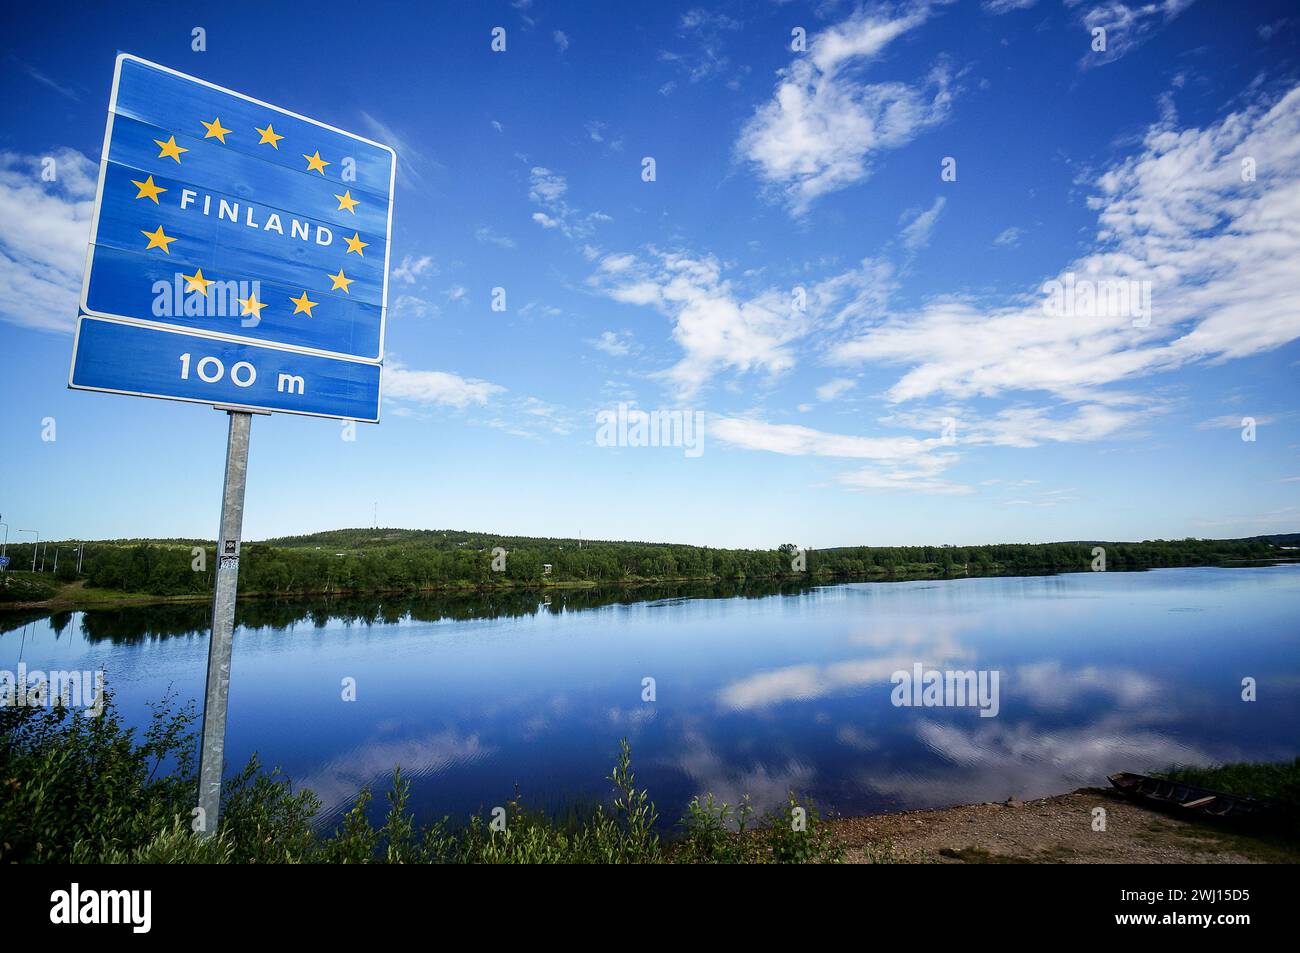 Finland Border Road sign, finland and sweden border on a lake Stock Photo